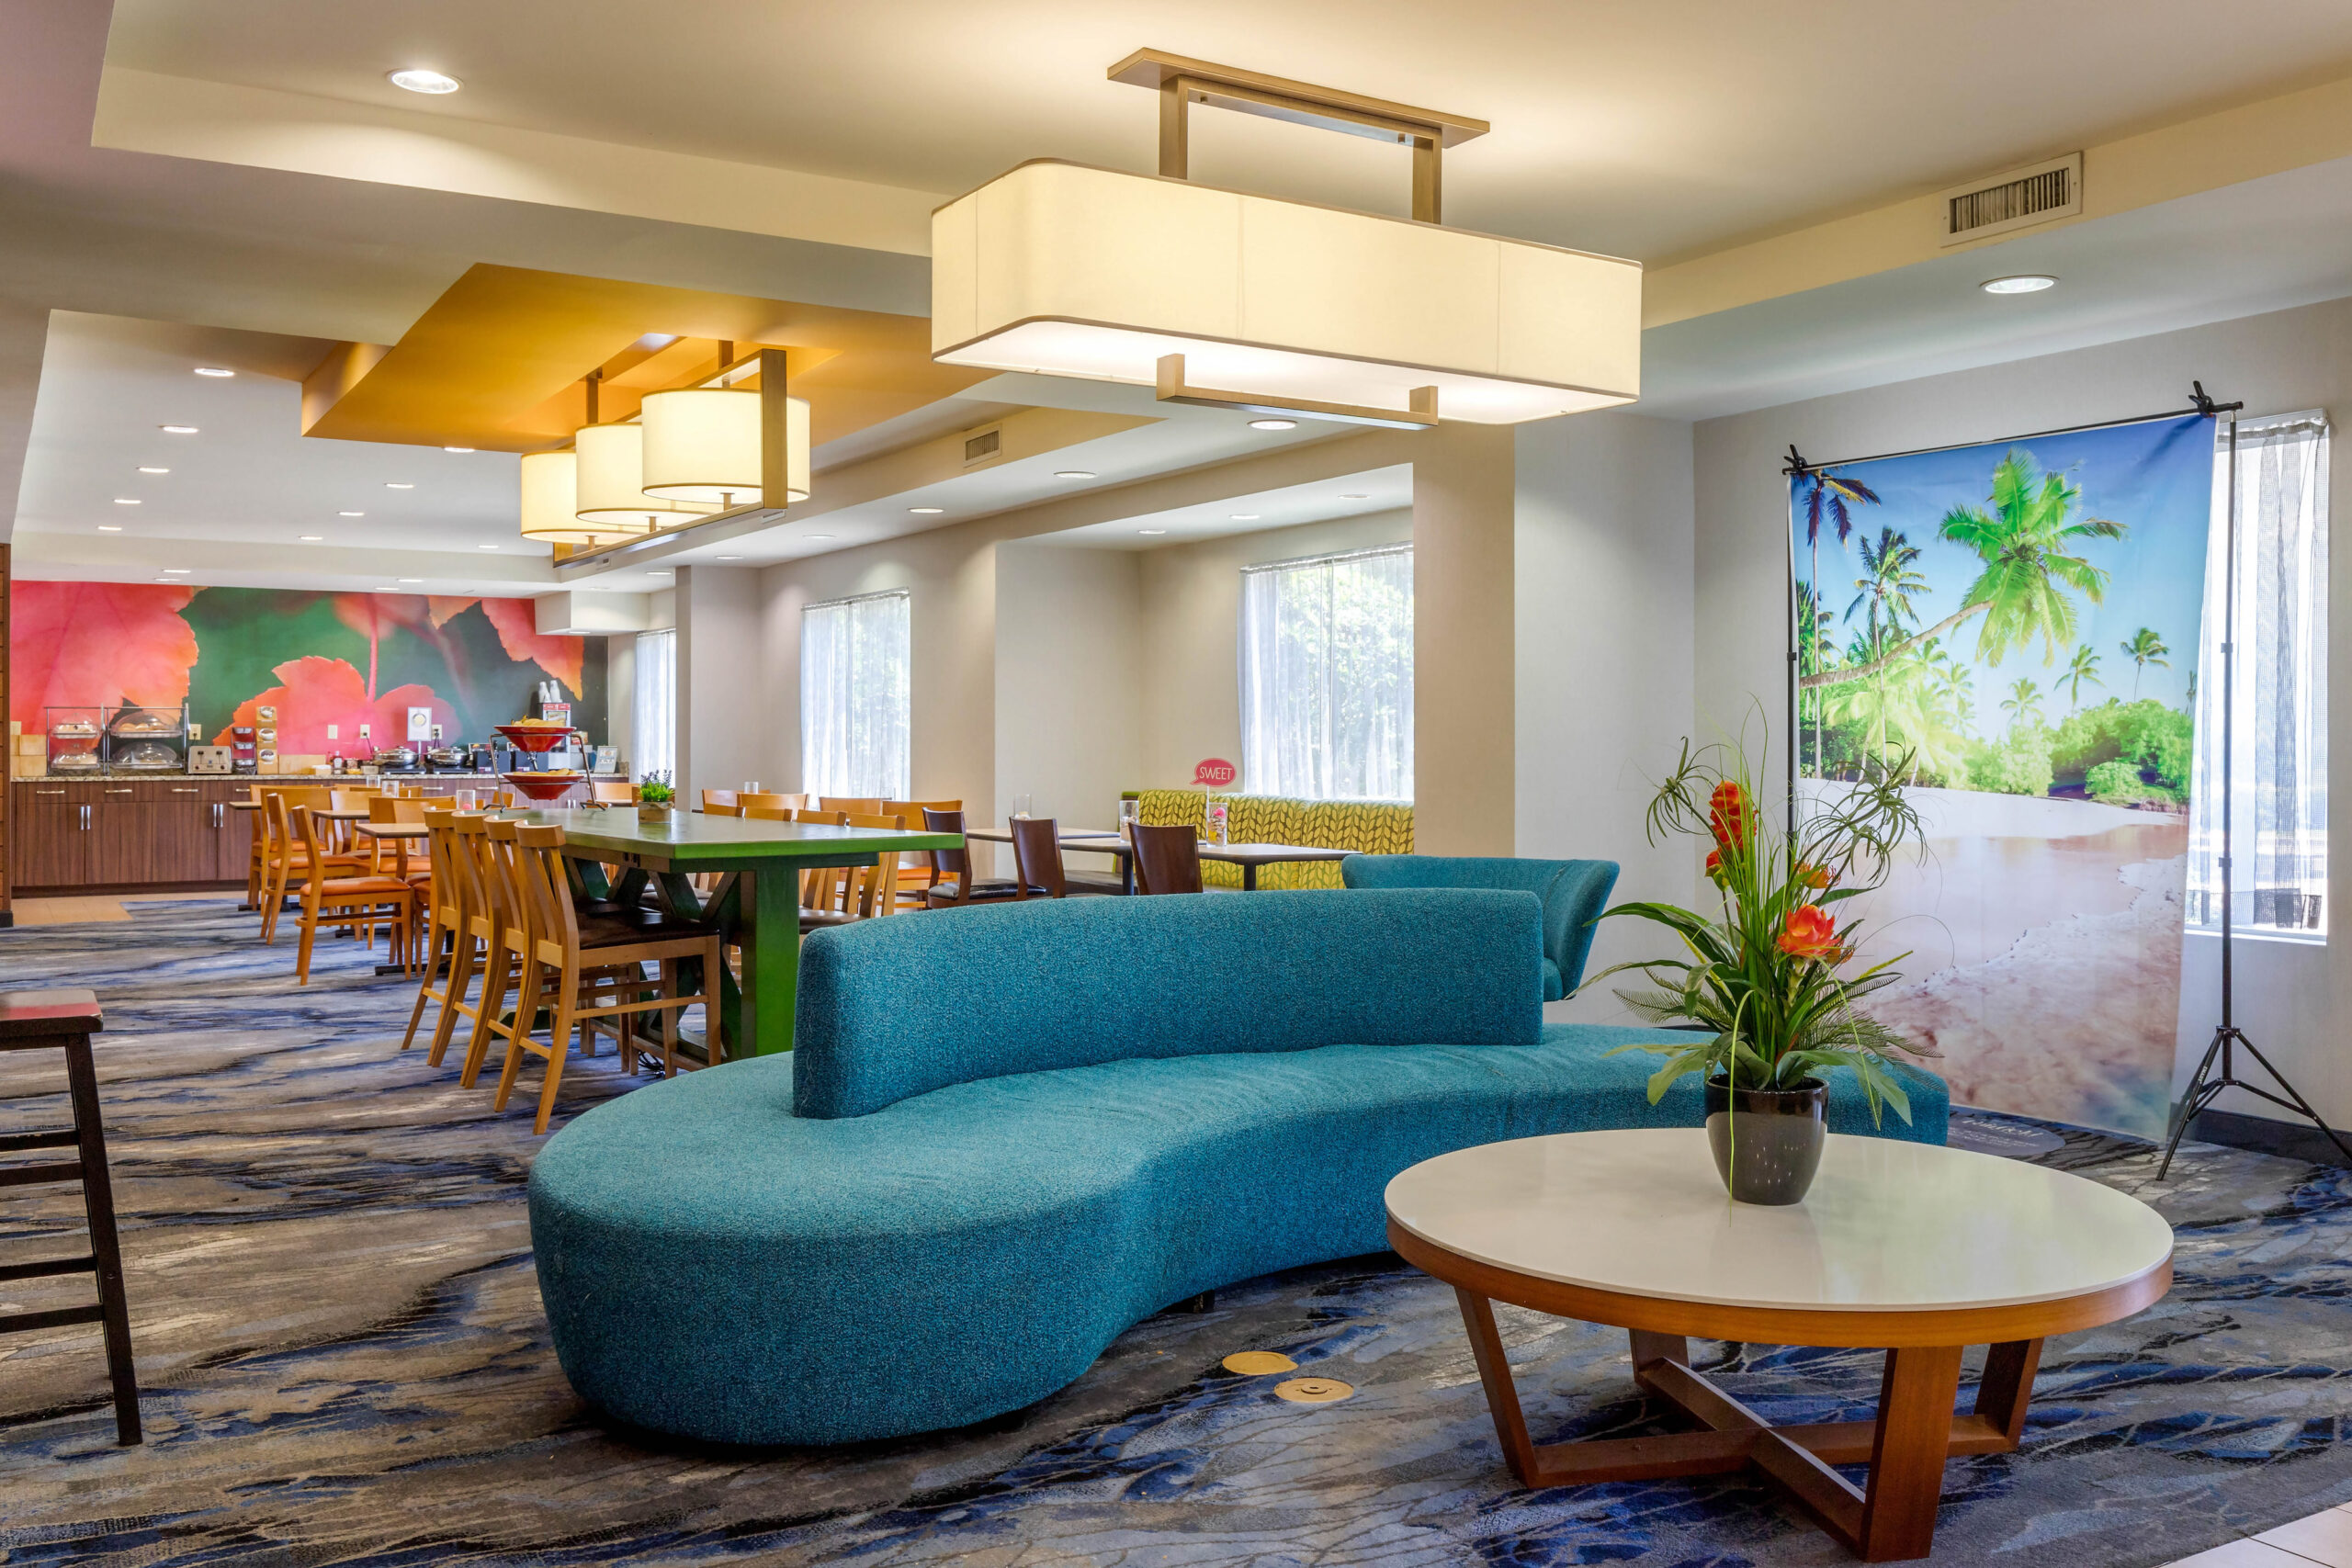 Colorful and modern hotel lobby area